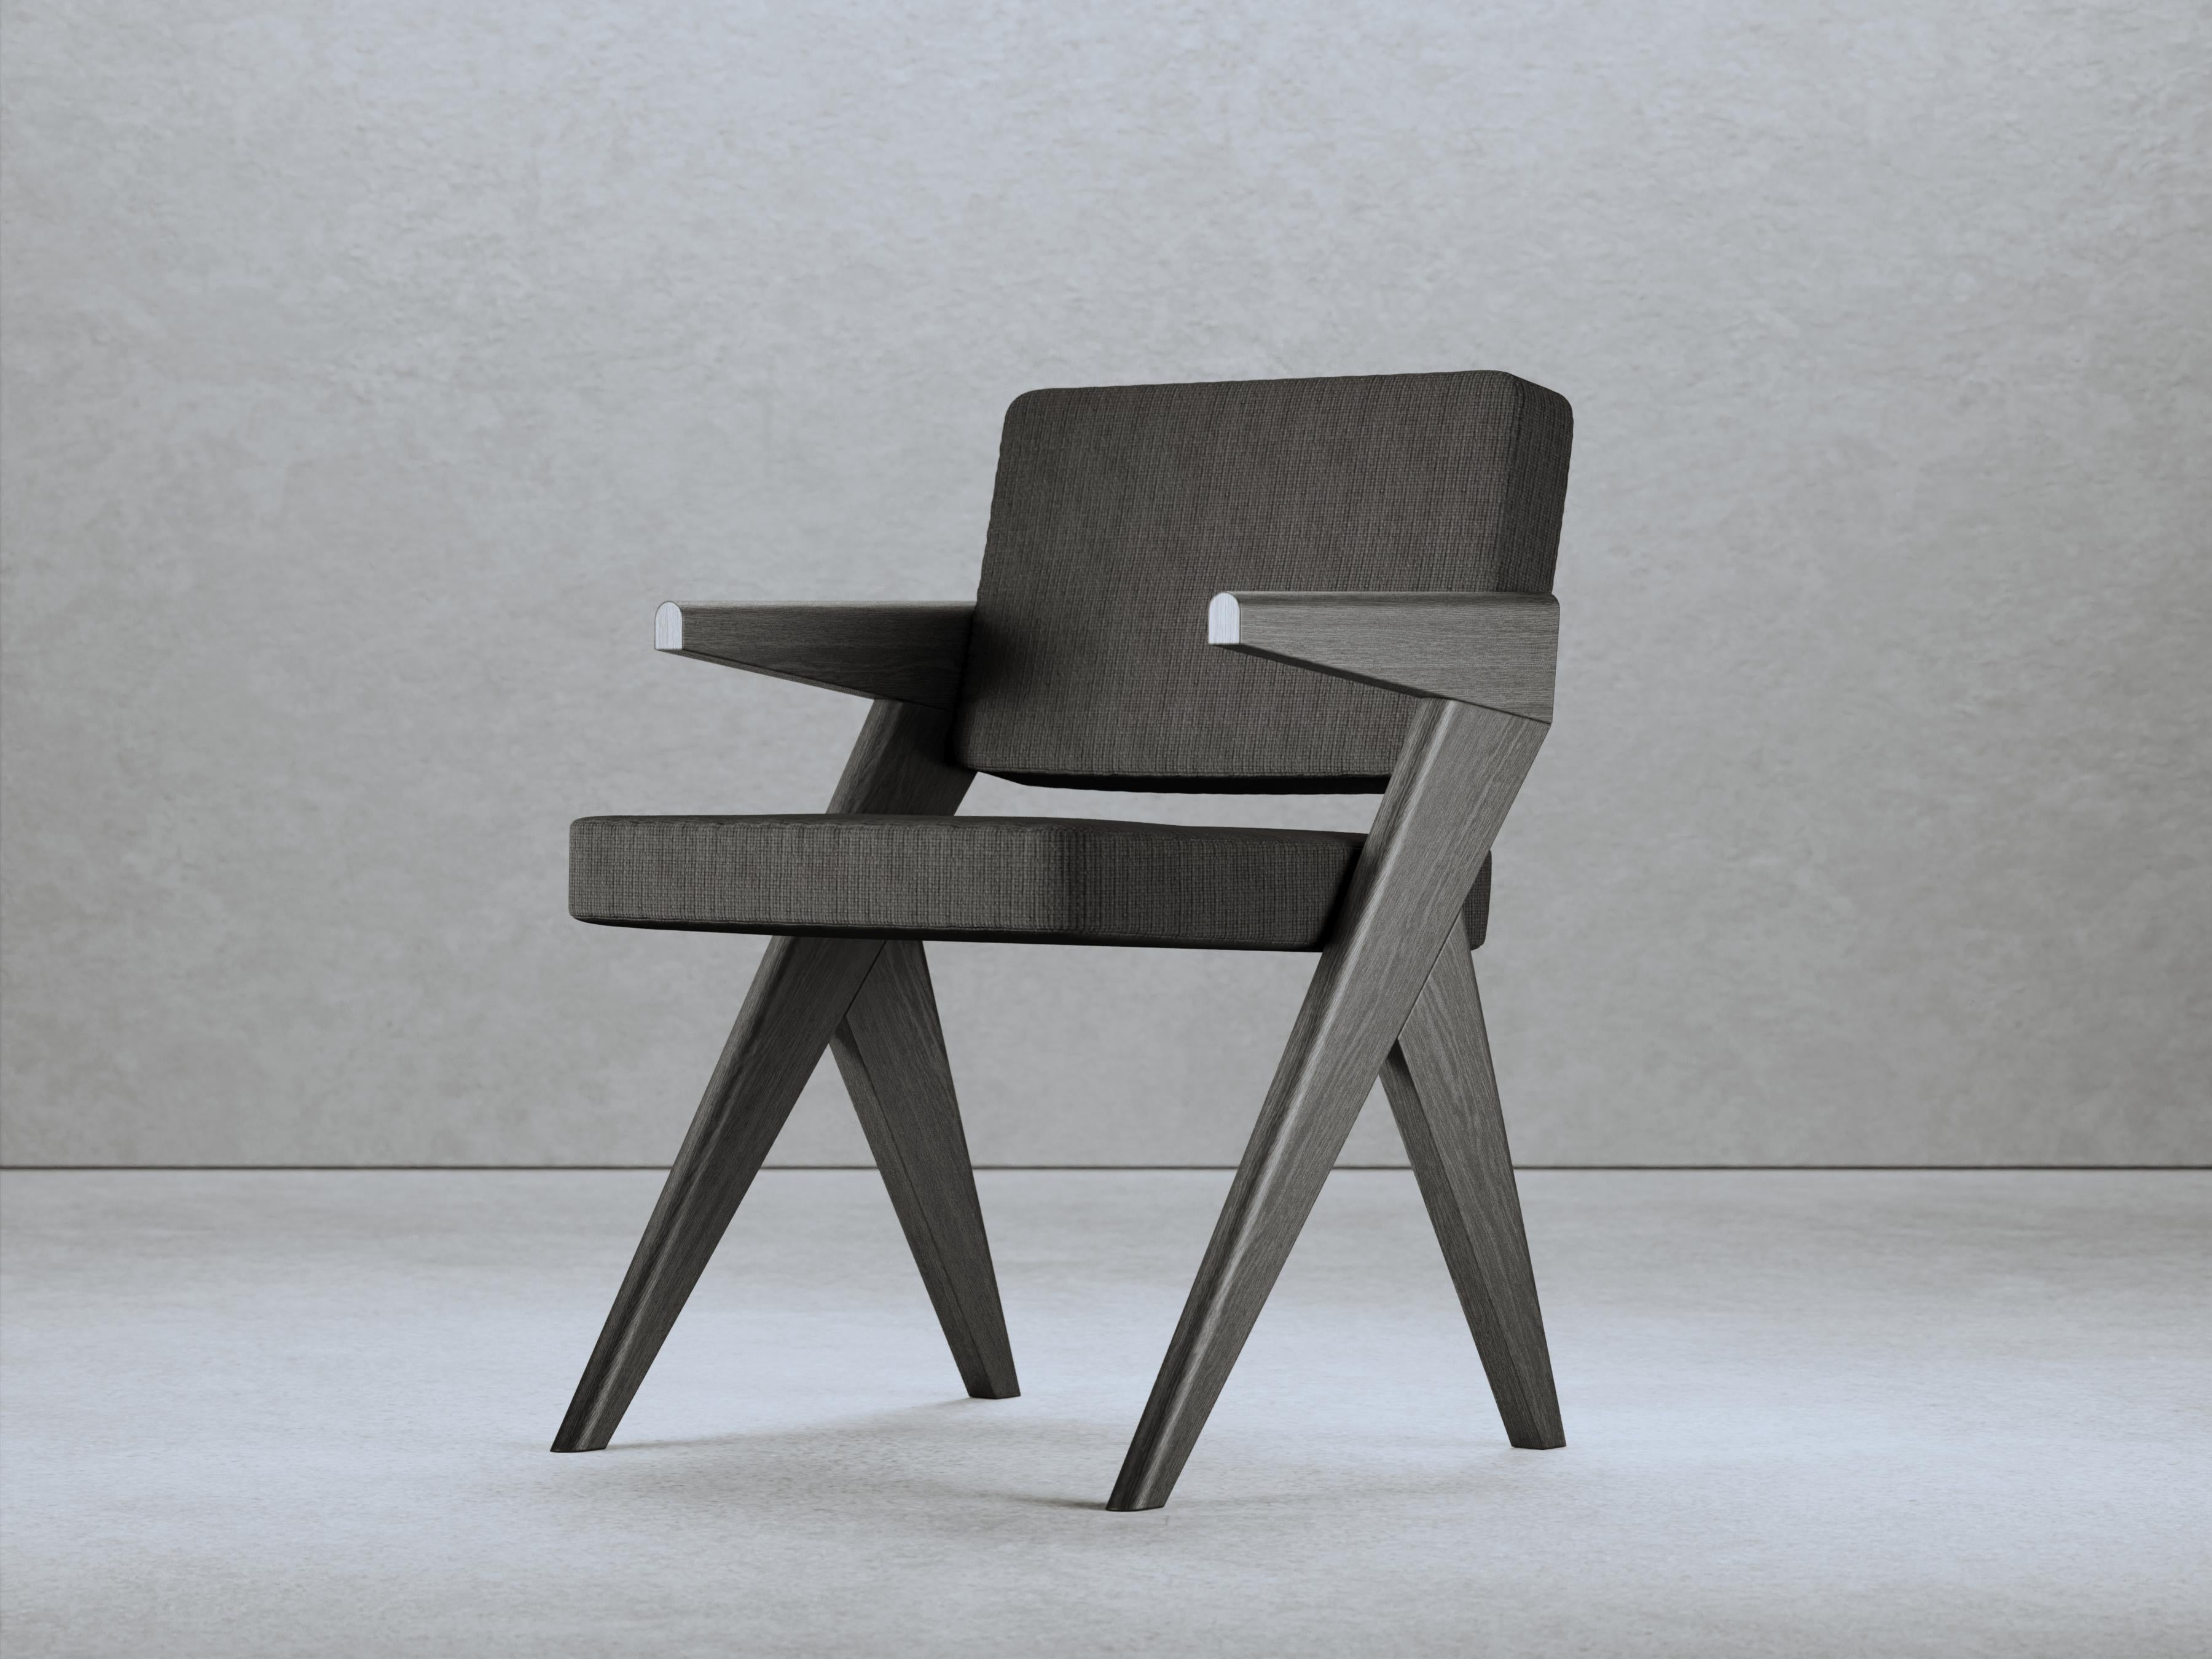 Loro Piana Linen Souvenir Chair With Armrest by Gio Pagani
Dimensions: D 55 x W 50 x H 88 cm. SH: 48 cm.
Materials: Black elm wood and Loro Piana linen.

In a fluid society capable of mixing infinite social and cultural varieties, the nostalgic